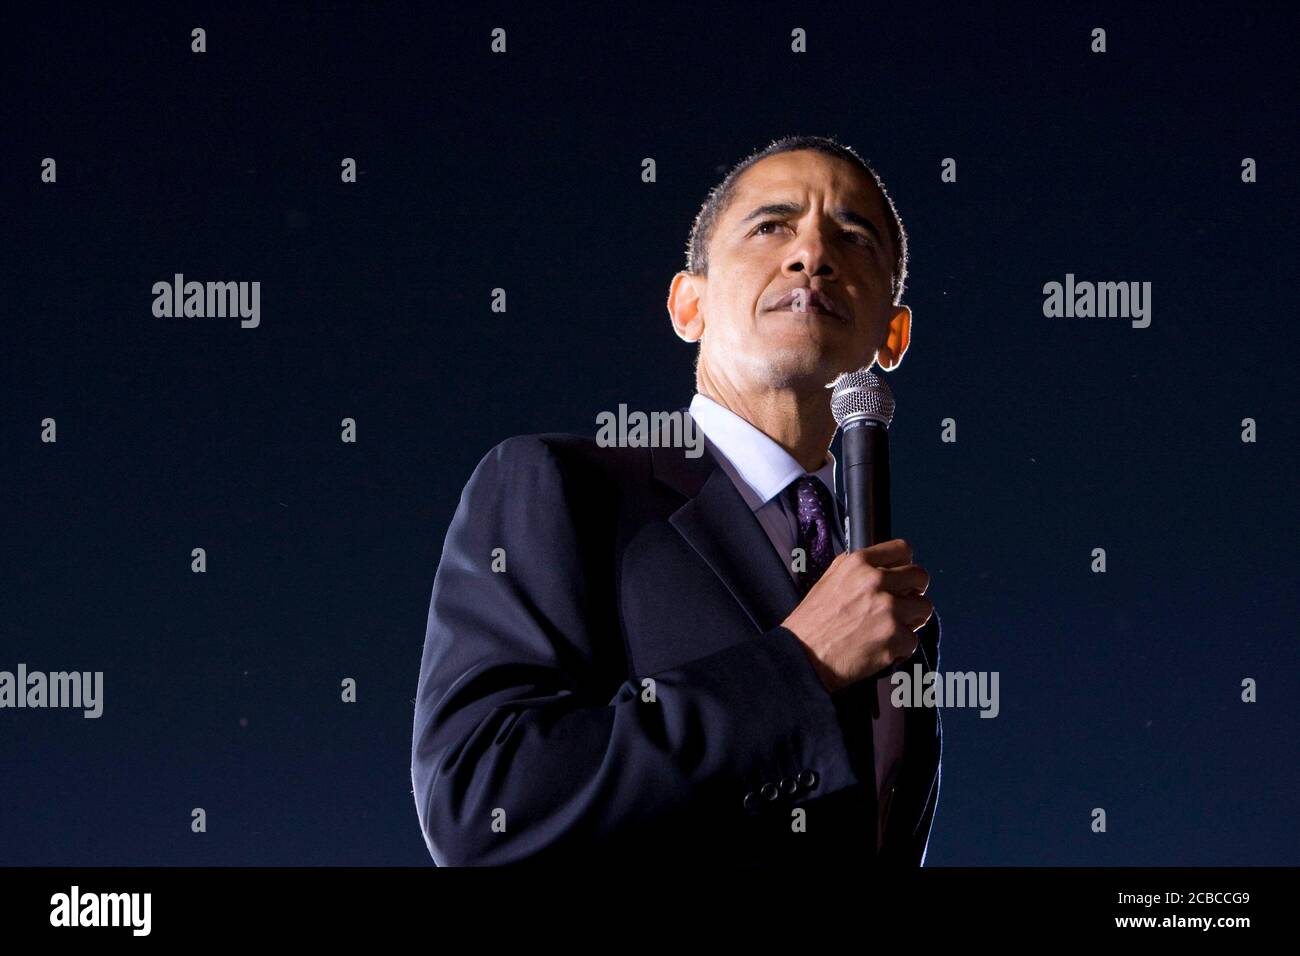 Austin, Texas USA, February 22, 2008: Democratic presidential hopeful Barack Obama speaks to a crowd of about 15,000 during a night-time rally in front of the Texas Capitol days before the Texas primary elections. ©Bob Daemmrich Stock Photo